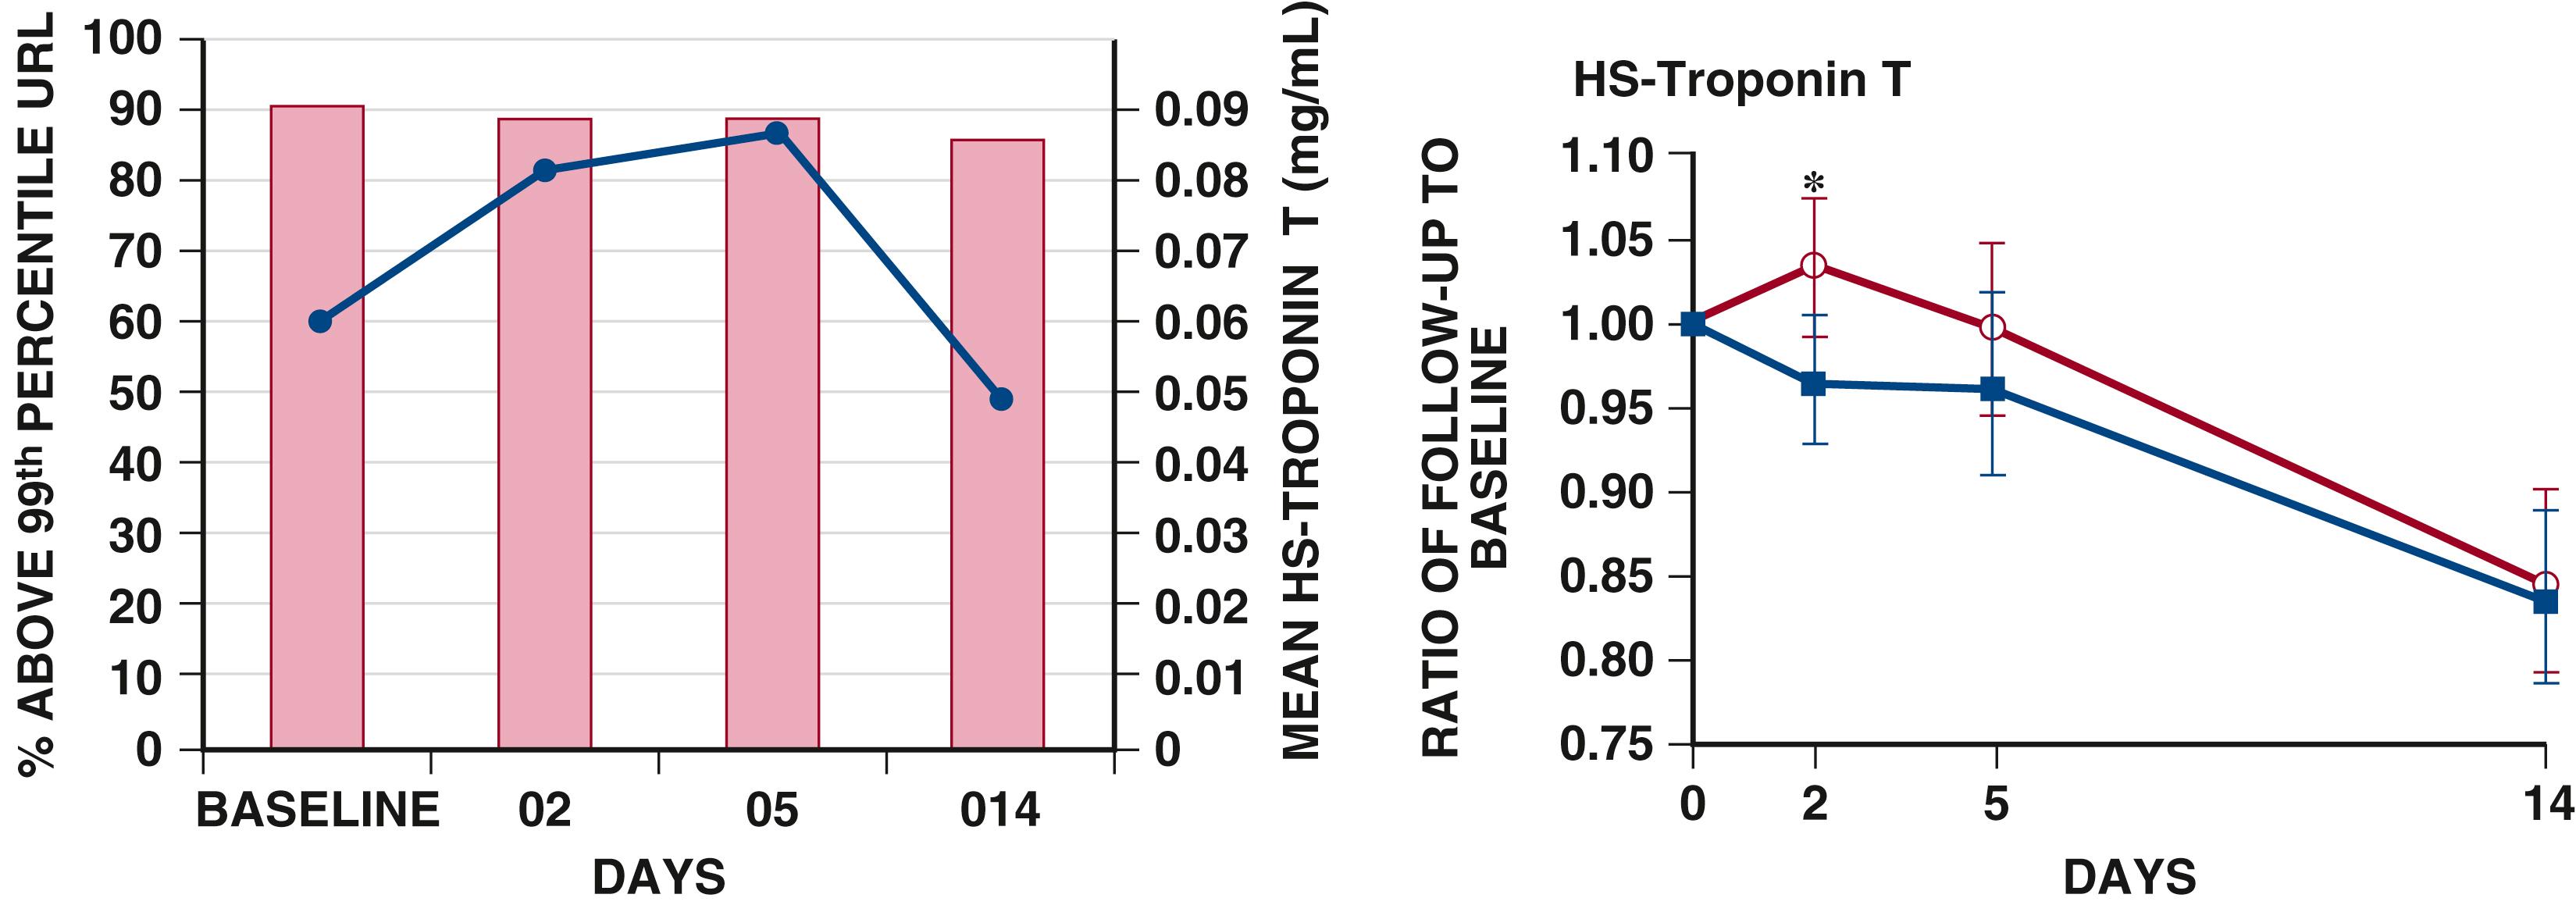 FIGURE 49.4, Incidence of elevated (above the 99th percentile upper reference limit) high-sensitivity troponin T in the RELAX-AHF study and effect of serelaxin therapy on troponin levels.